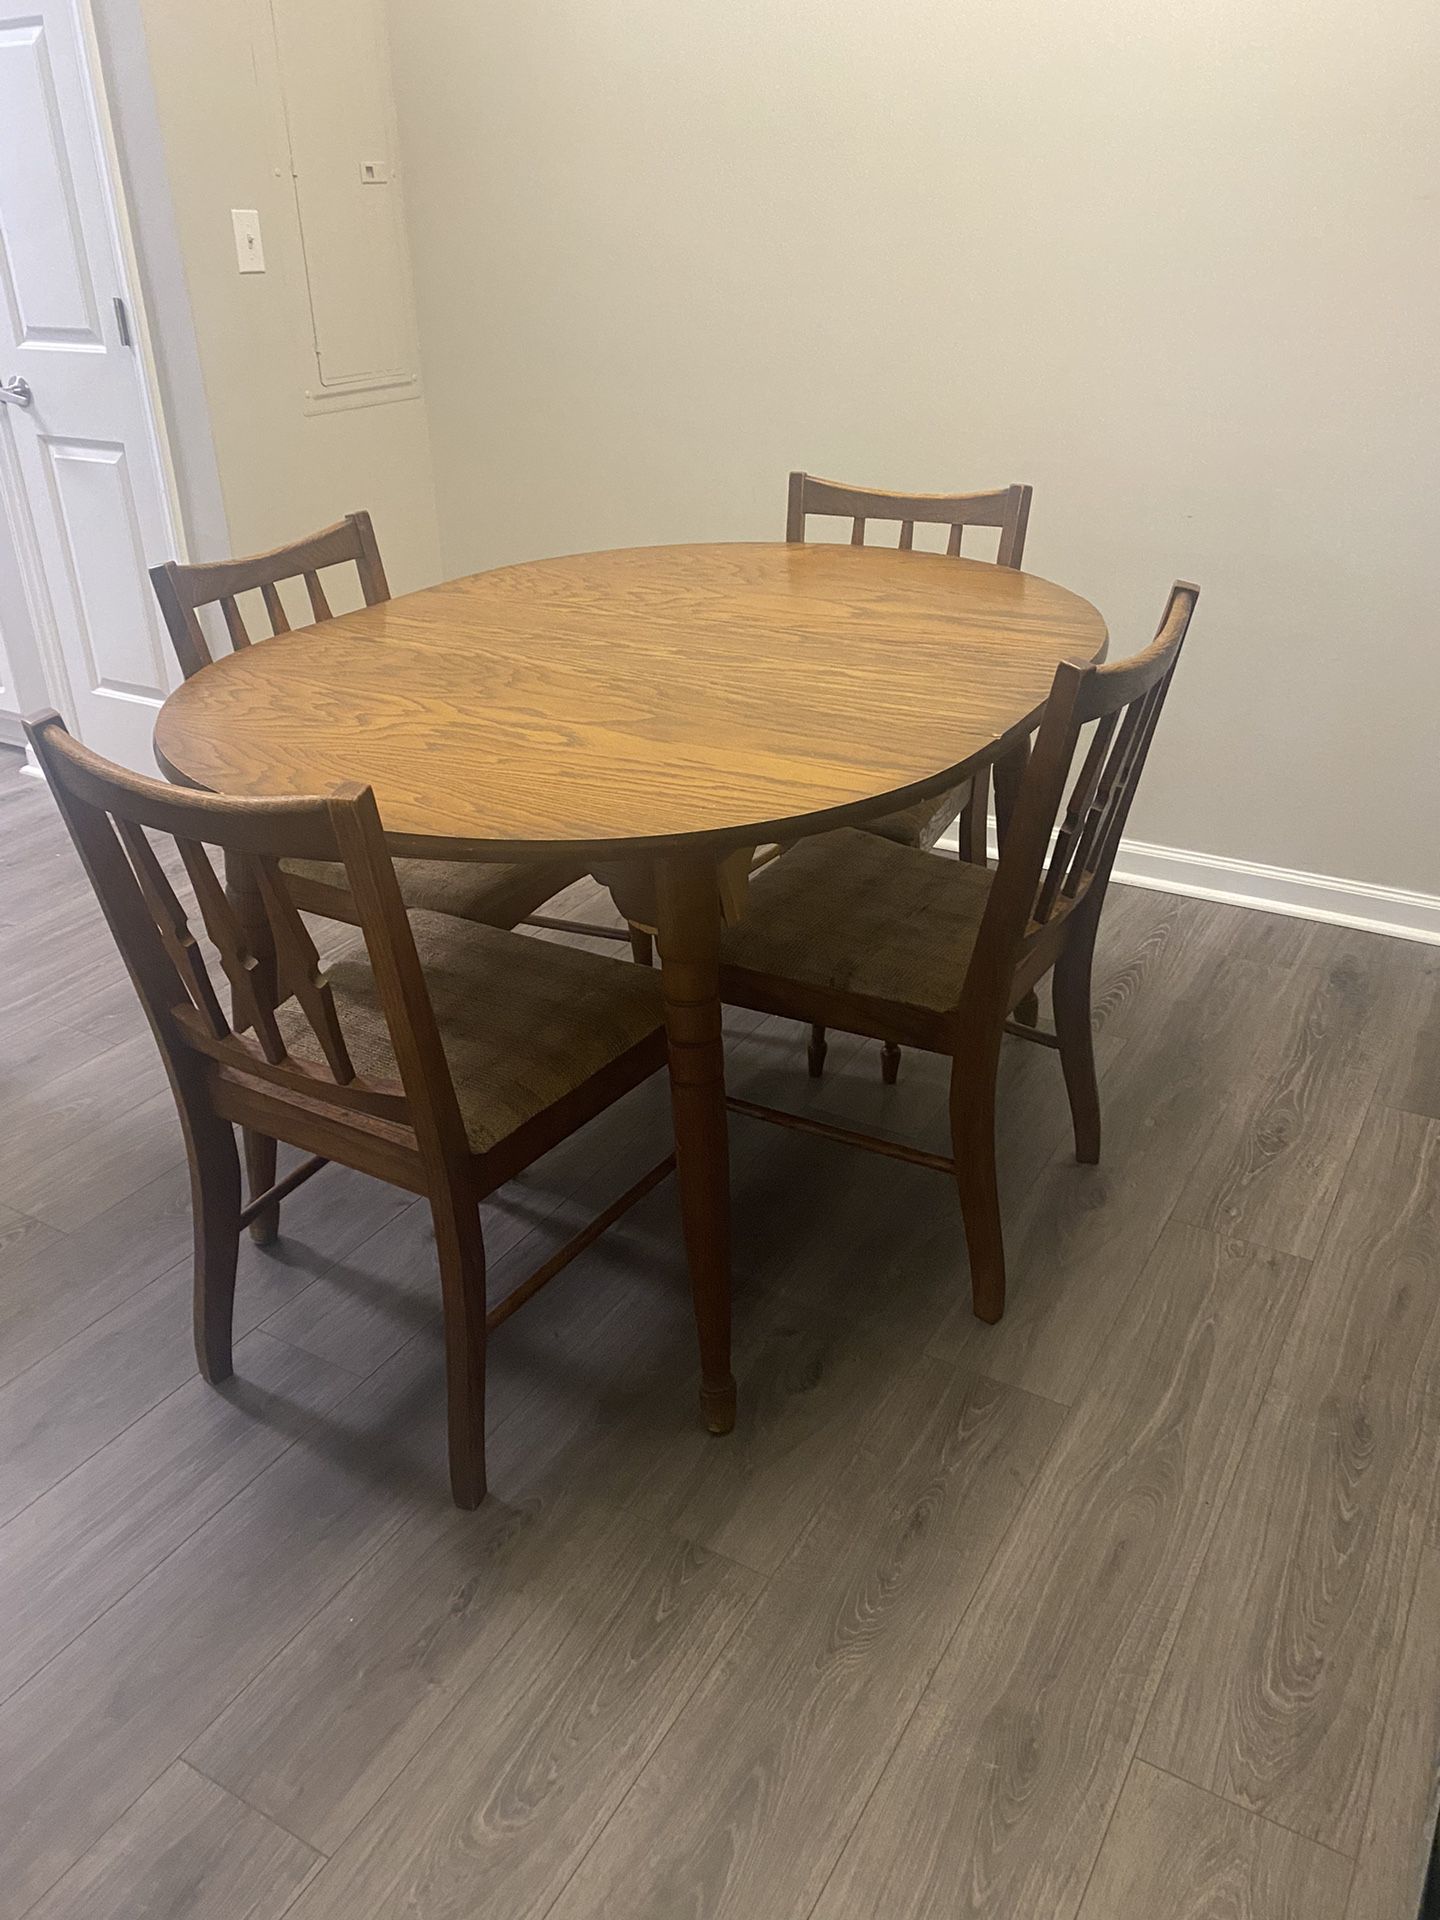 Cute vintage dining table with 4 matching chairs